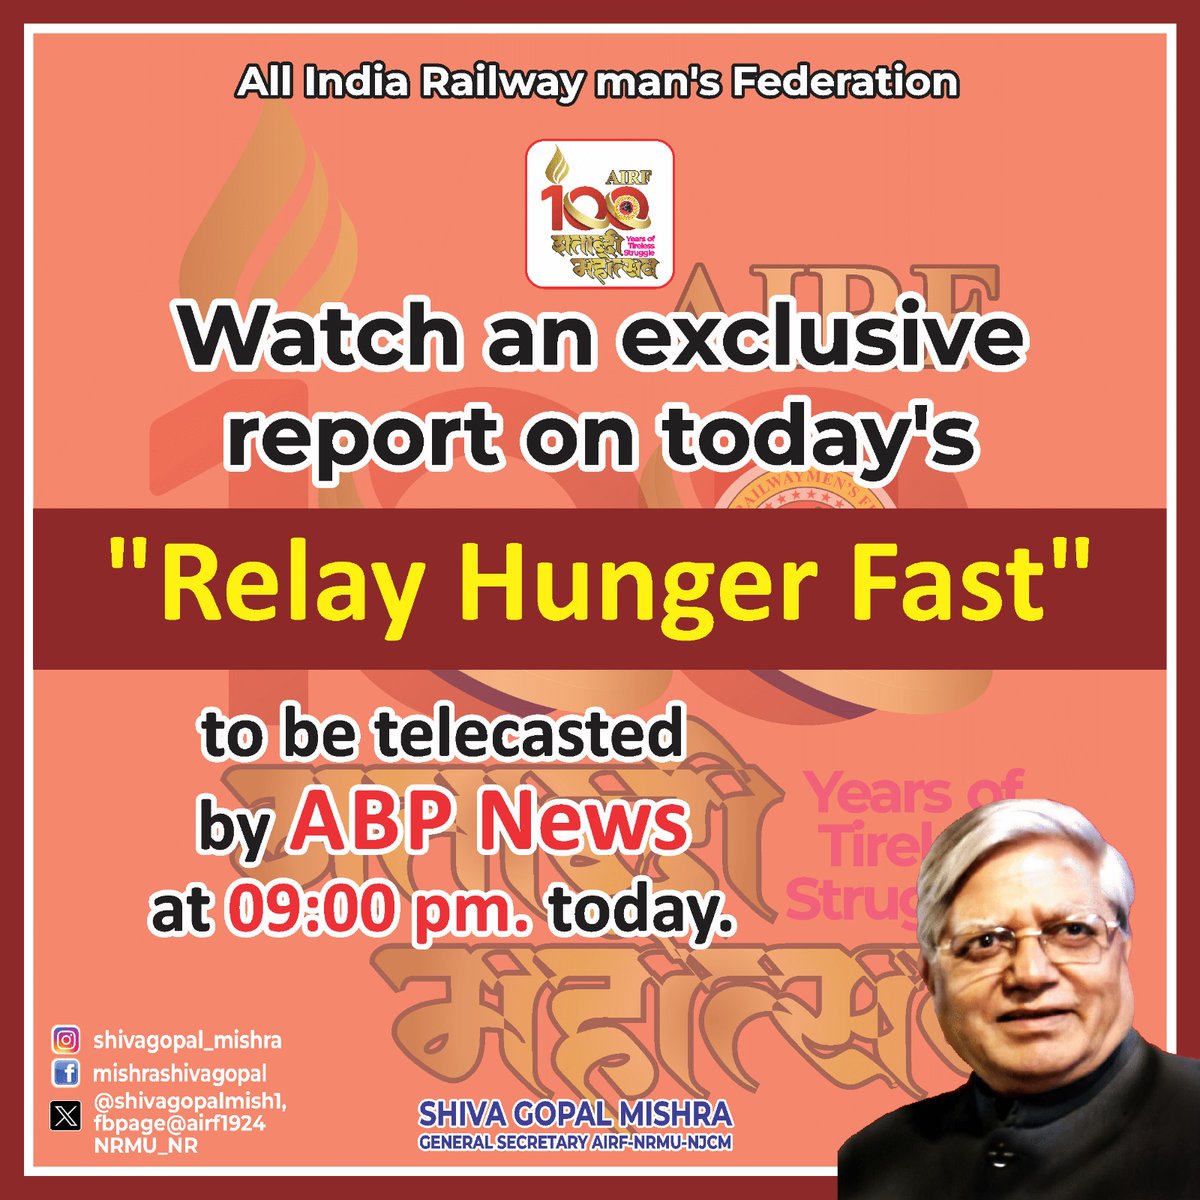 Watch an exclusive report on today's 'Relay Hunger Fast', to be telecasted by ABP News, at 09:00 pm. today.
@RailMinIndia @ITFglobalunion #ministry #union #NRMU #ABPNews #ABPLIVE #ABPMajha @AshwiniVaishnaw @ITF_DelhiOffice @HqNrmu @ABPNews @abplive @abpmajhatv